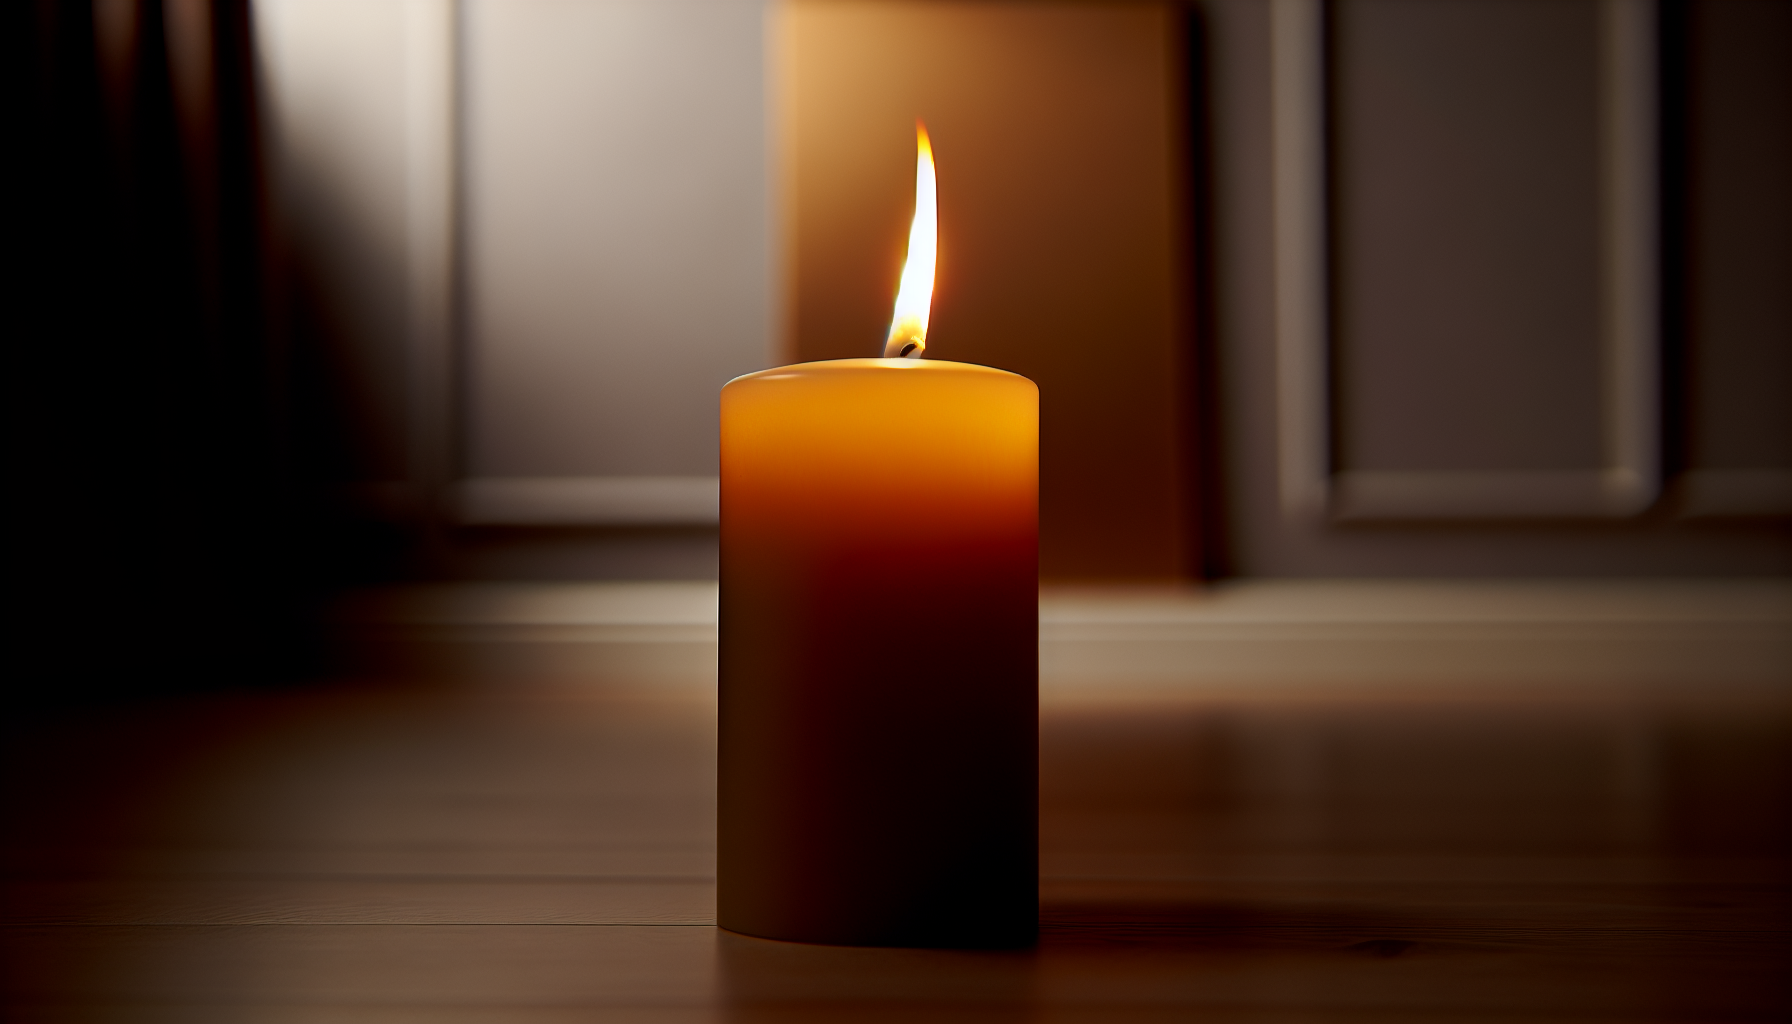 A candle burning in a dimly lit room symbolizing adoration and consecration